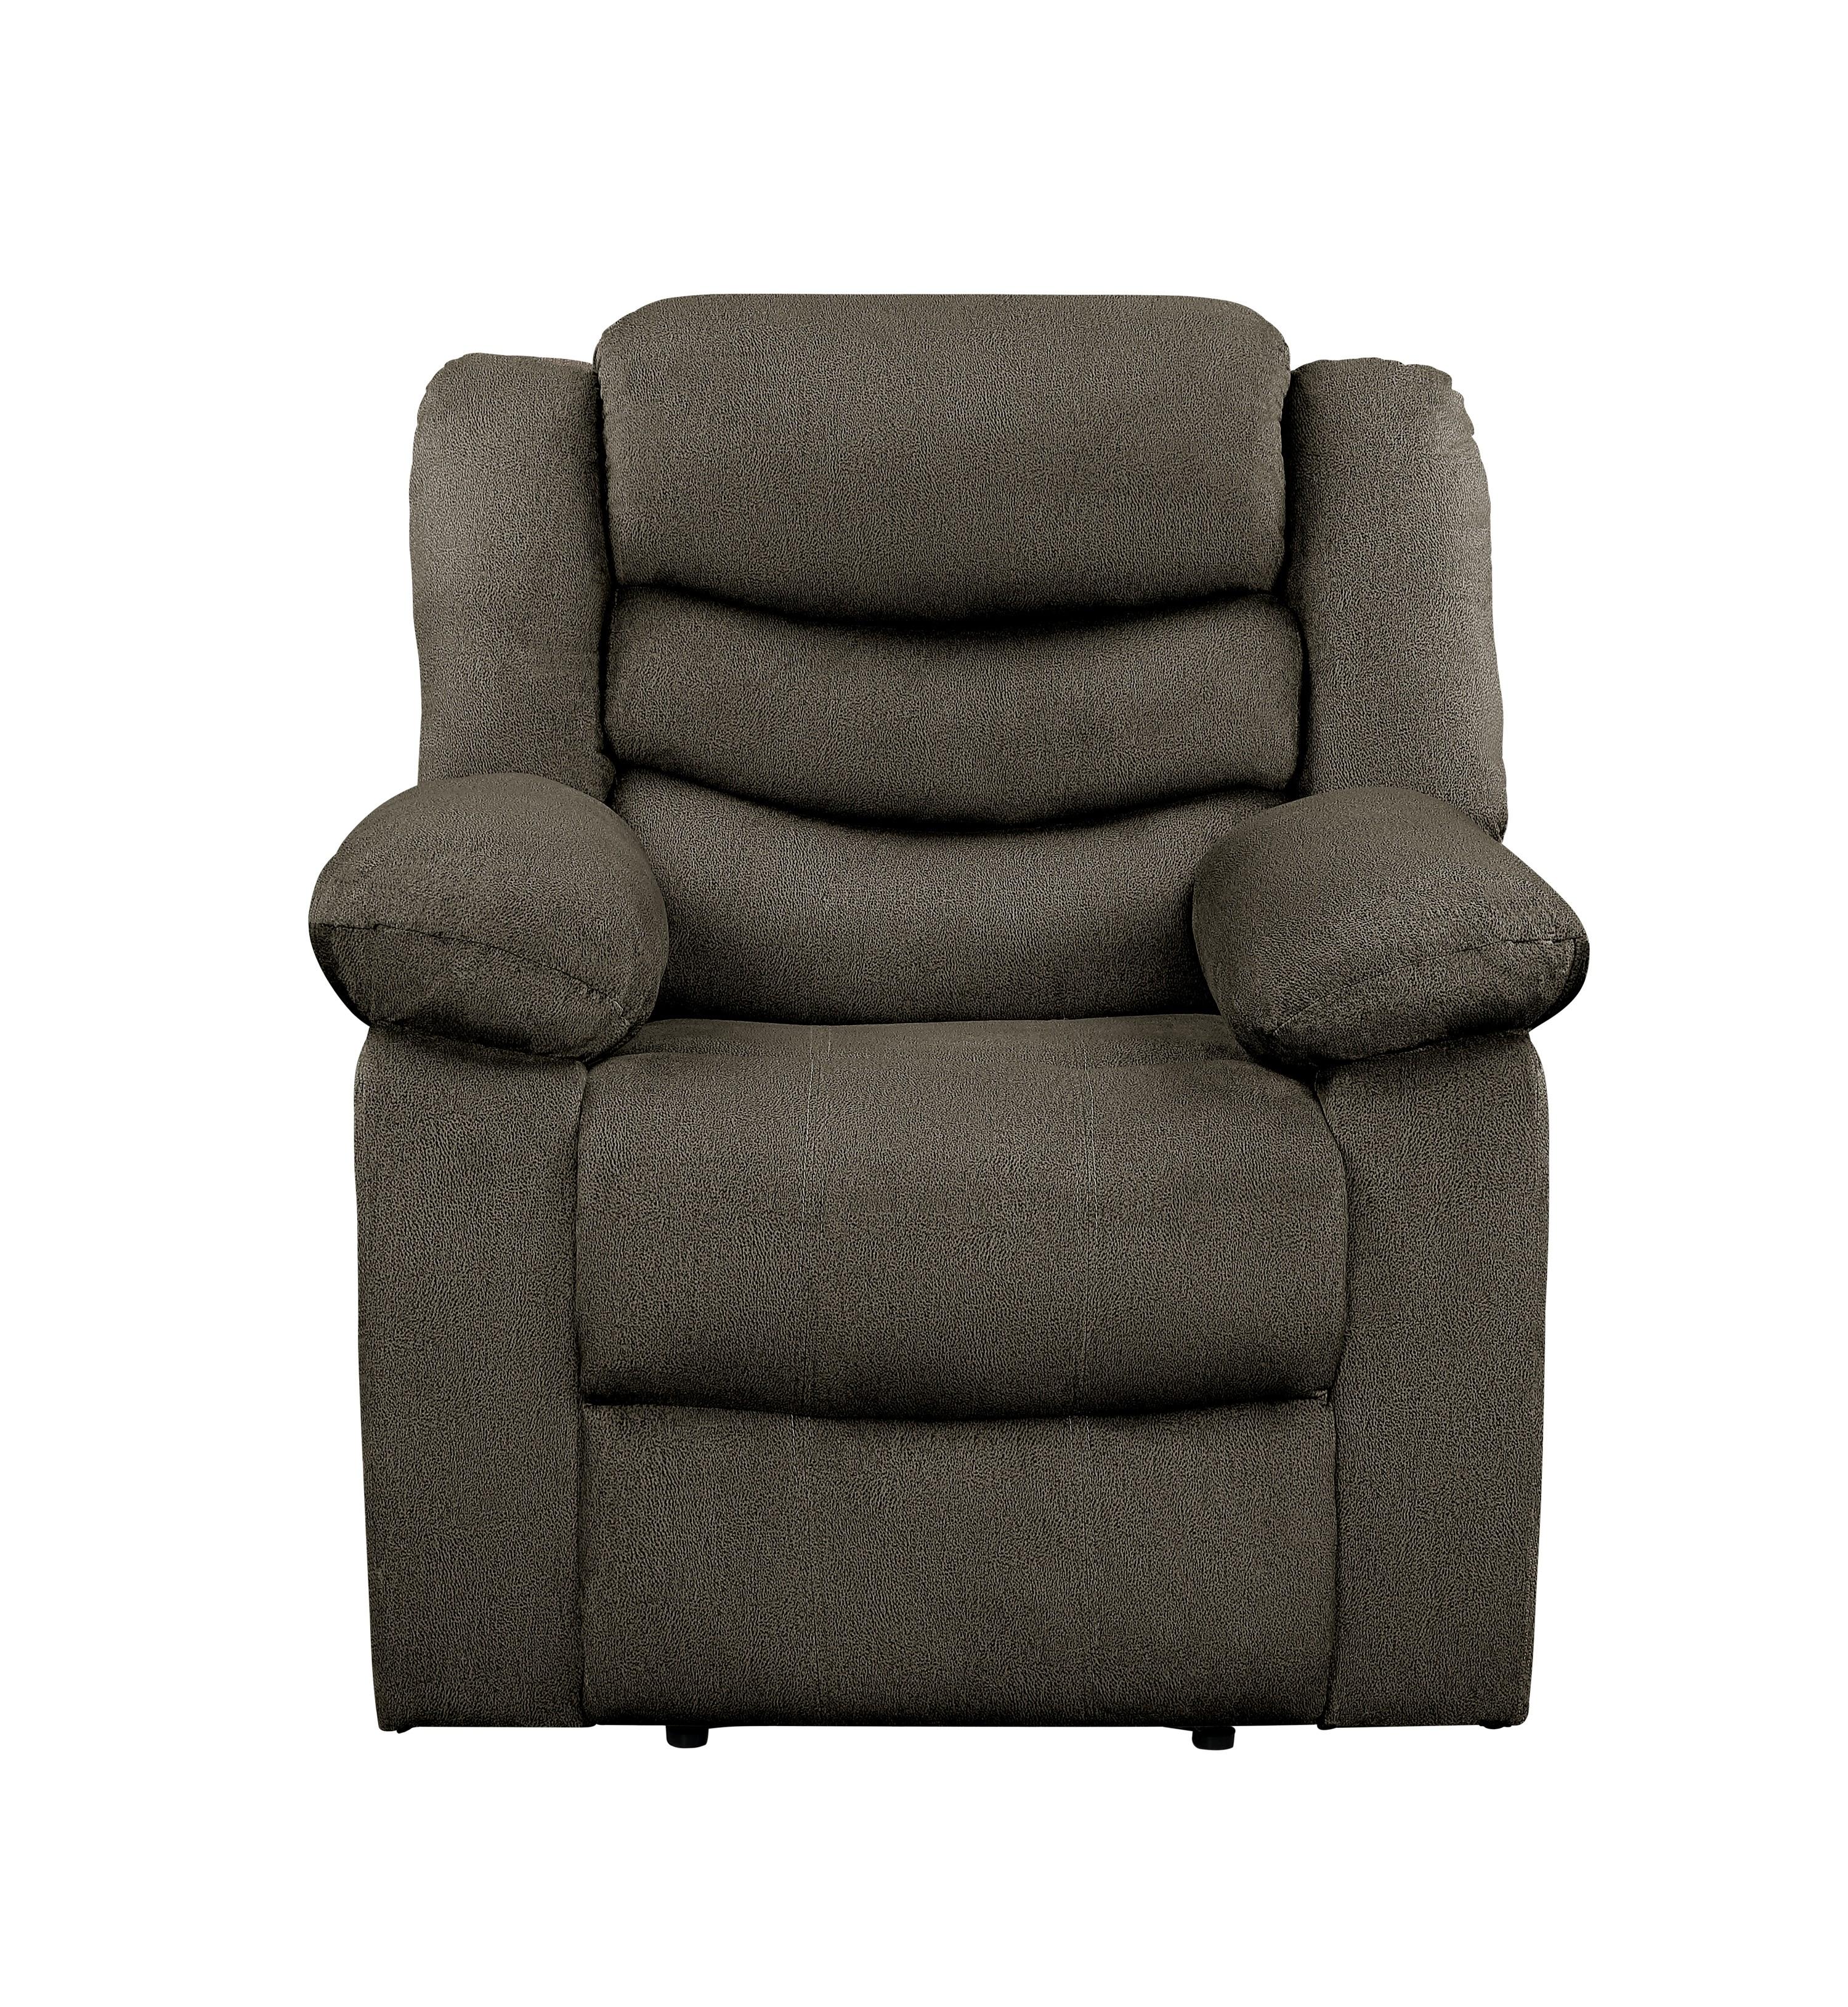 Transitional Reclining Chair 9526BR-1 Discus 9526BR-1 in Brown Microfiber